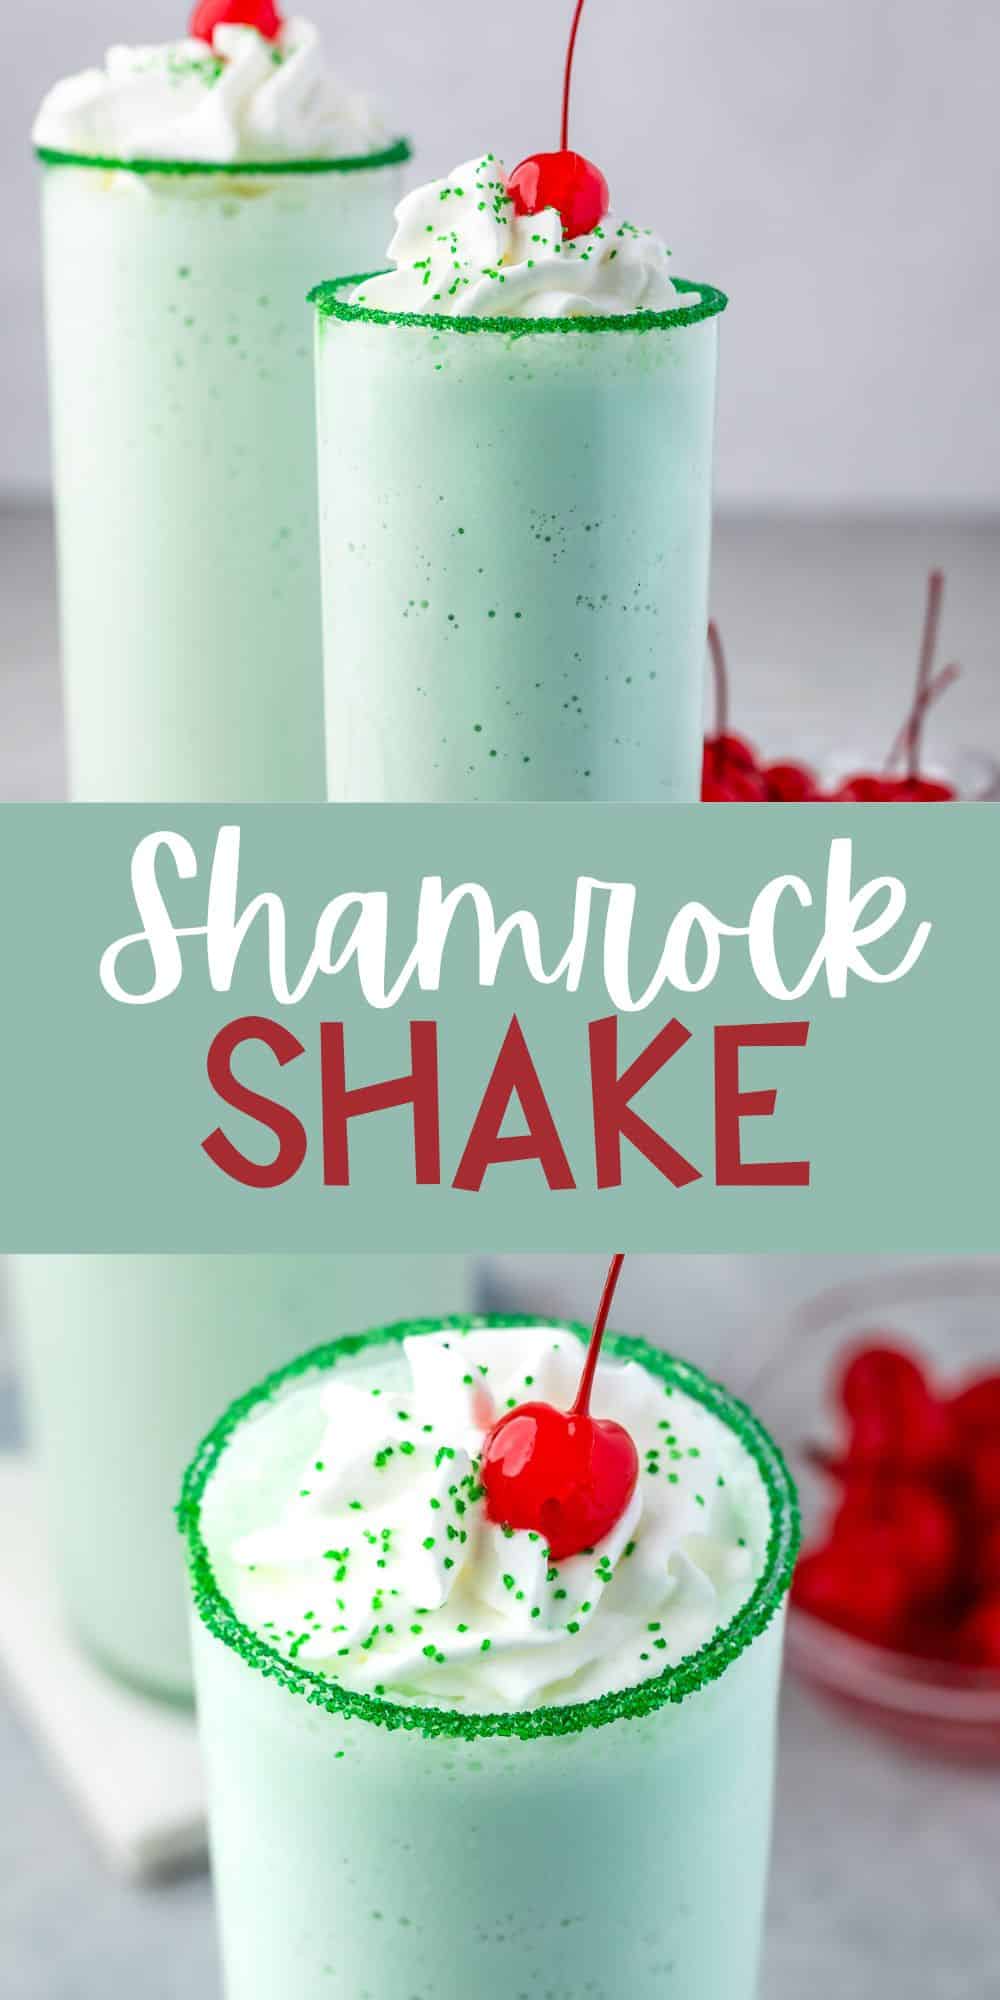 two photos of green shake in a clear glass topped with whipped cream and a cherry with words on the image.